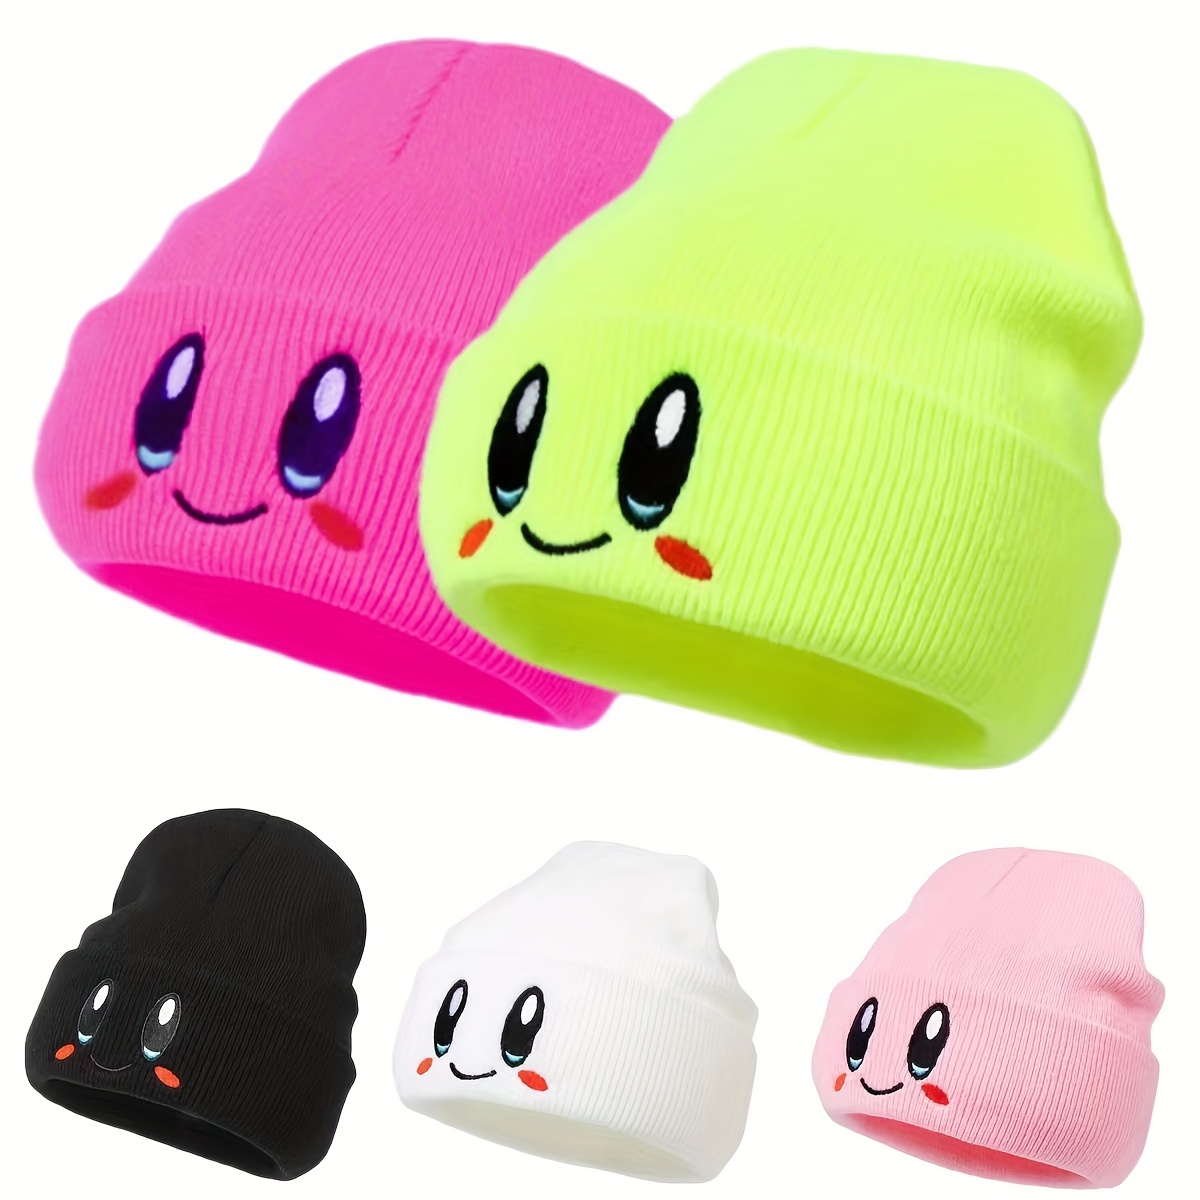 

Anime Big Eyes Beanie Cute Cartoon Smiling Embroidery Knit Hat Unisex Couple Skull Hat Candy Color Lightweight Warm Ski Hats For Women & Men